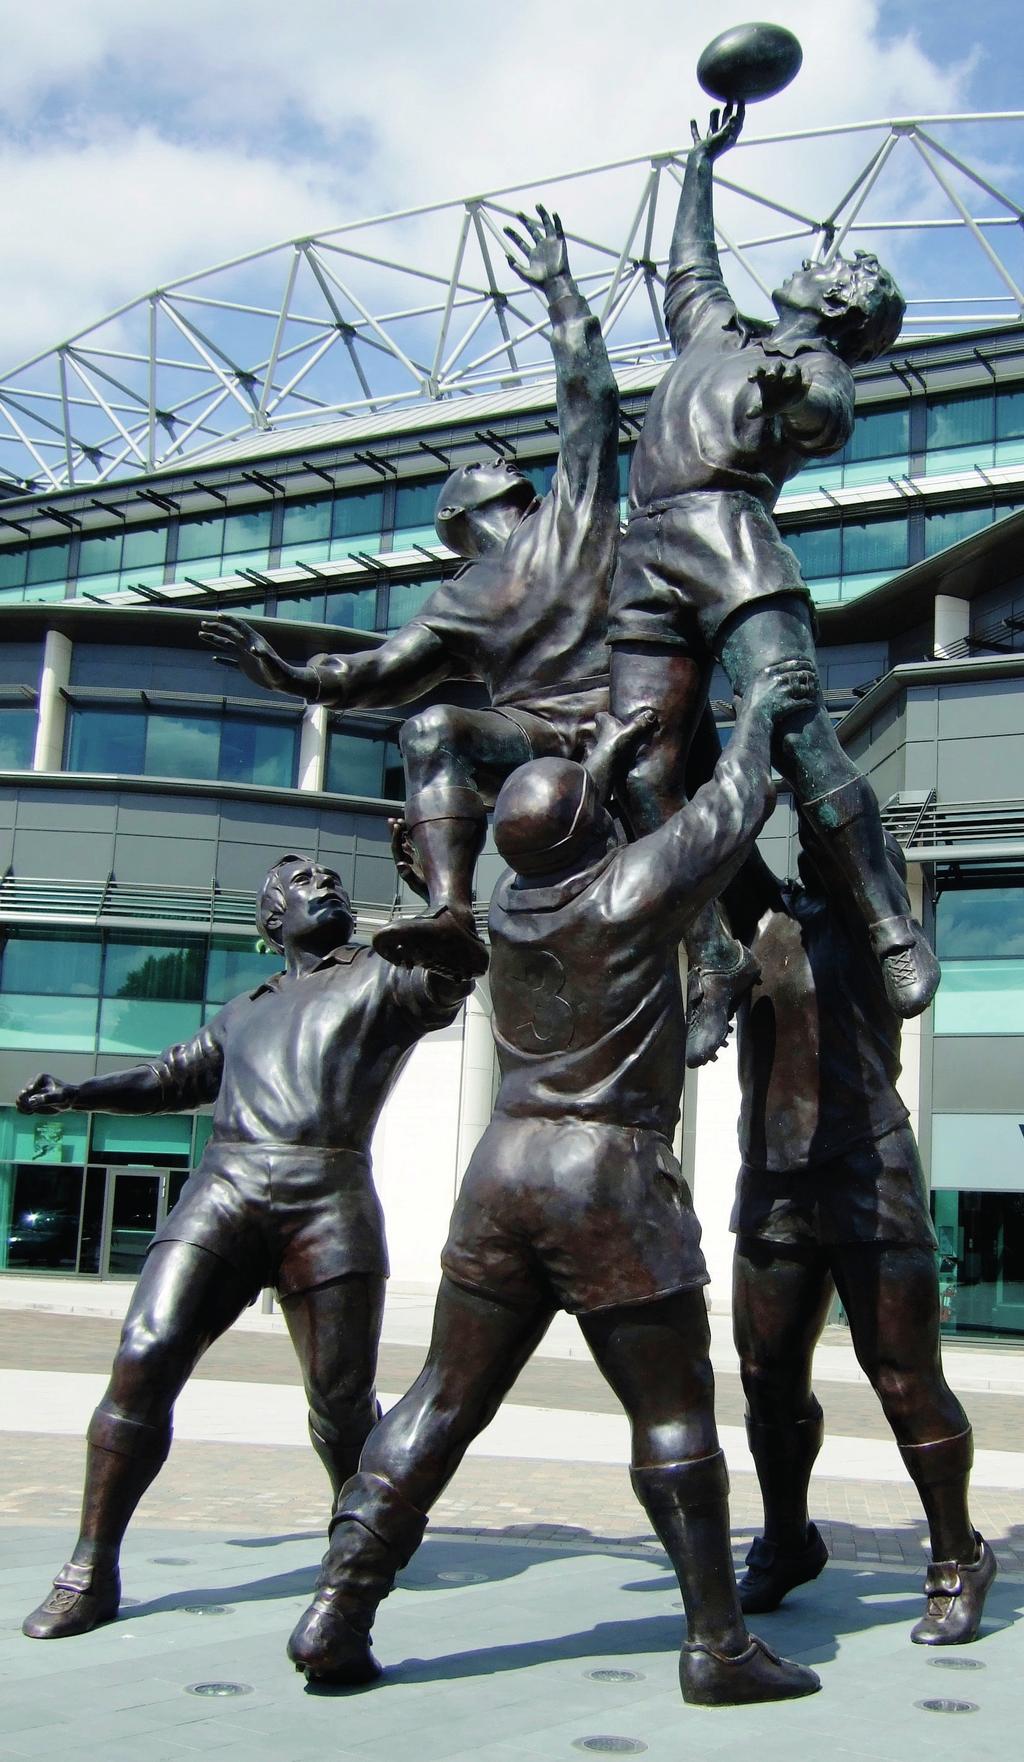 CORE VALUES SCULPTURE - TWICKENHAM STADIUM RUGBY FOOTBALL UNION'S CORE VALUES OF THE GAME TEAMWORK, RESPECT, ENJOYMENT, DISCIPLINE and SPORTSMANSHIP are Rugby s Core Values which make the game